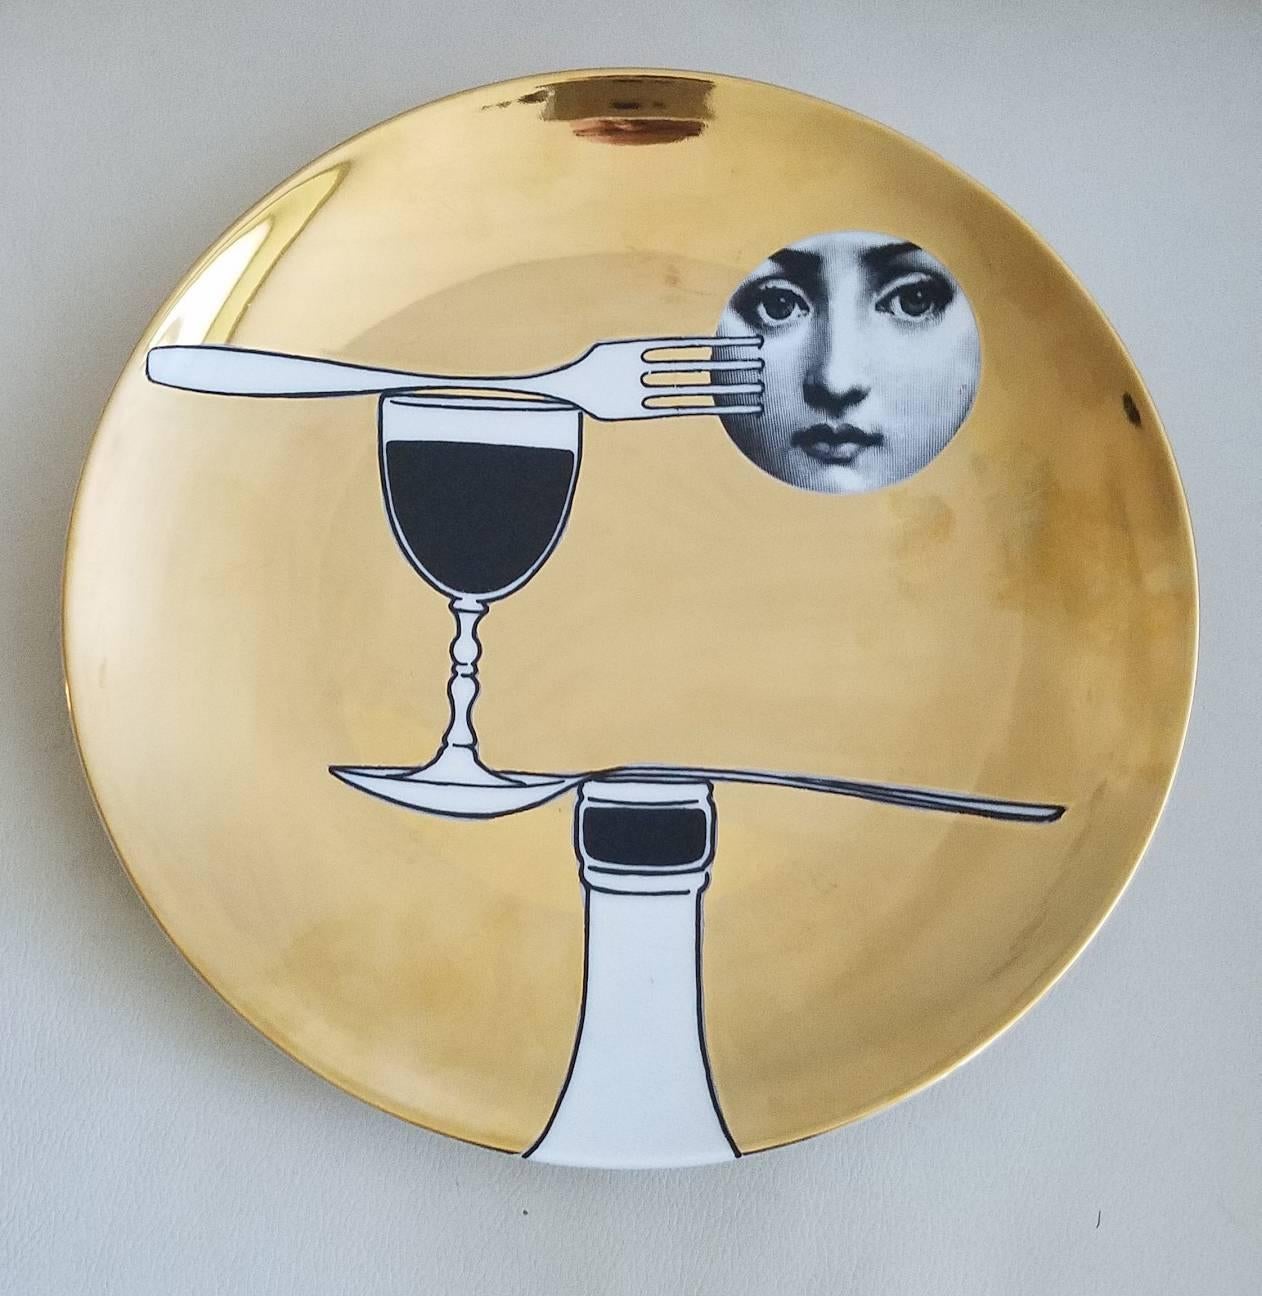 Fornasetti Gold Tema E variazioni set of six plates, image of Lina Cavalieri,
Atelier Fornasetti.

Including number 34, 45, 47, 60, 136, and 347.

A variation of Fornasetti's Tema E Variazioni series based on the opera singer Lina Cavalieri's